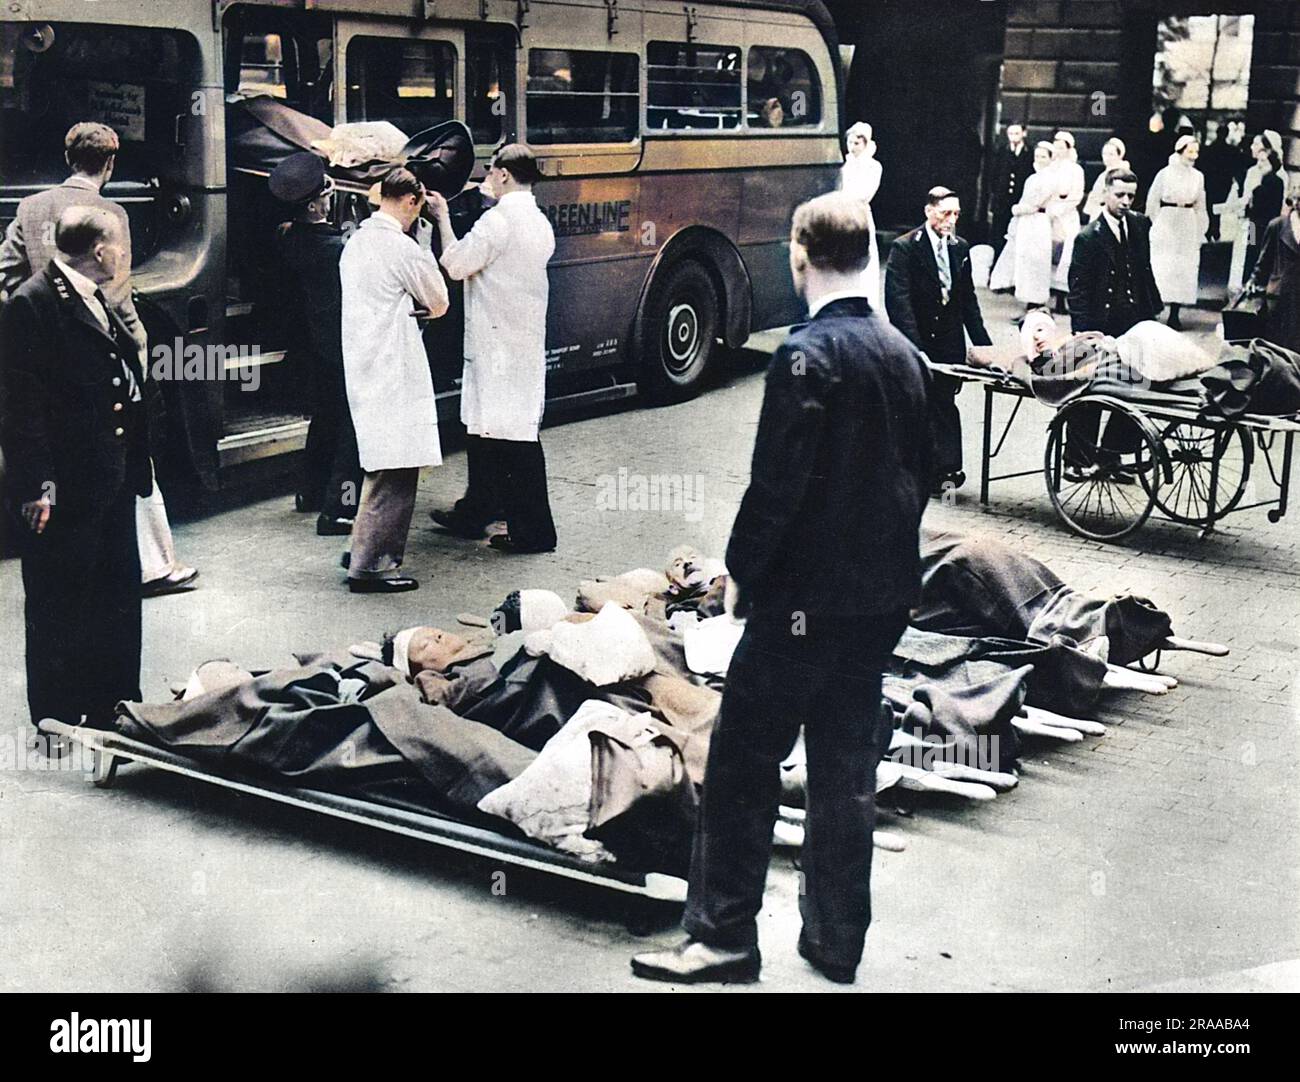 Evacuating hospital patients from a London hospital at the beginning of World War Two. For the evacuation of patients to the country, motor coaches were temporarily converted into motor ambulances.     Date: 1939 Stock Photo